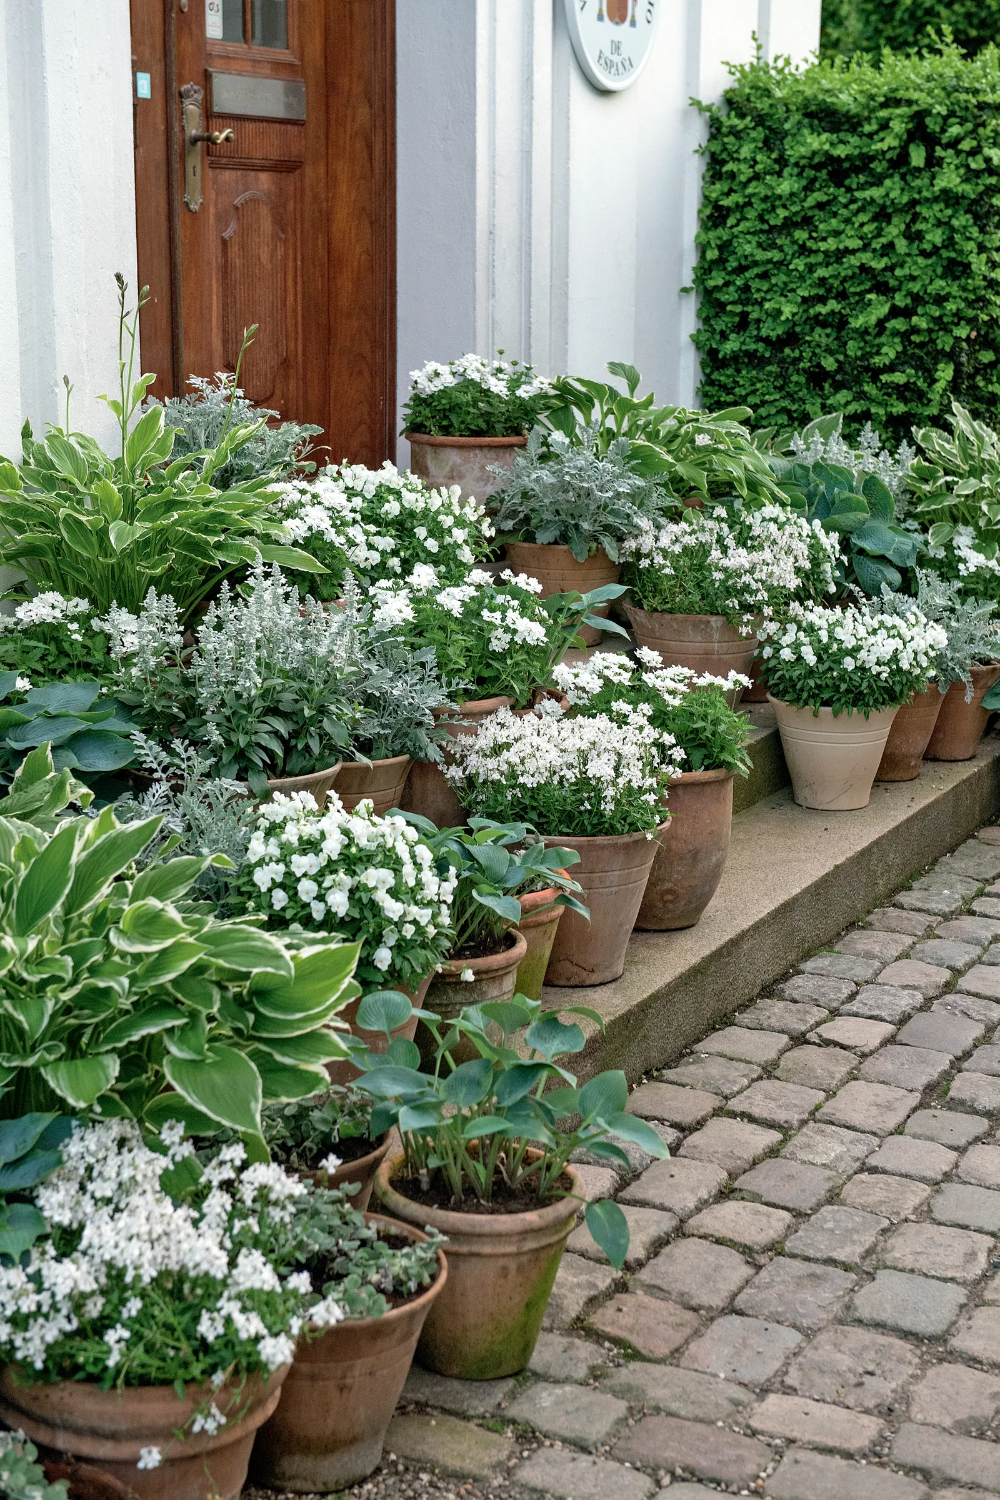 Container Gardening The Perfect Option for Limited Space Gardens